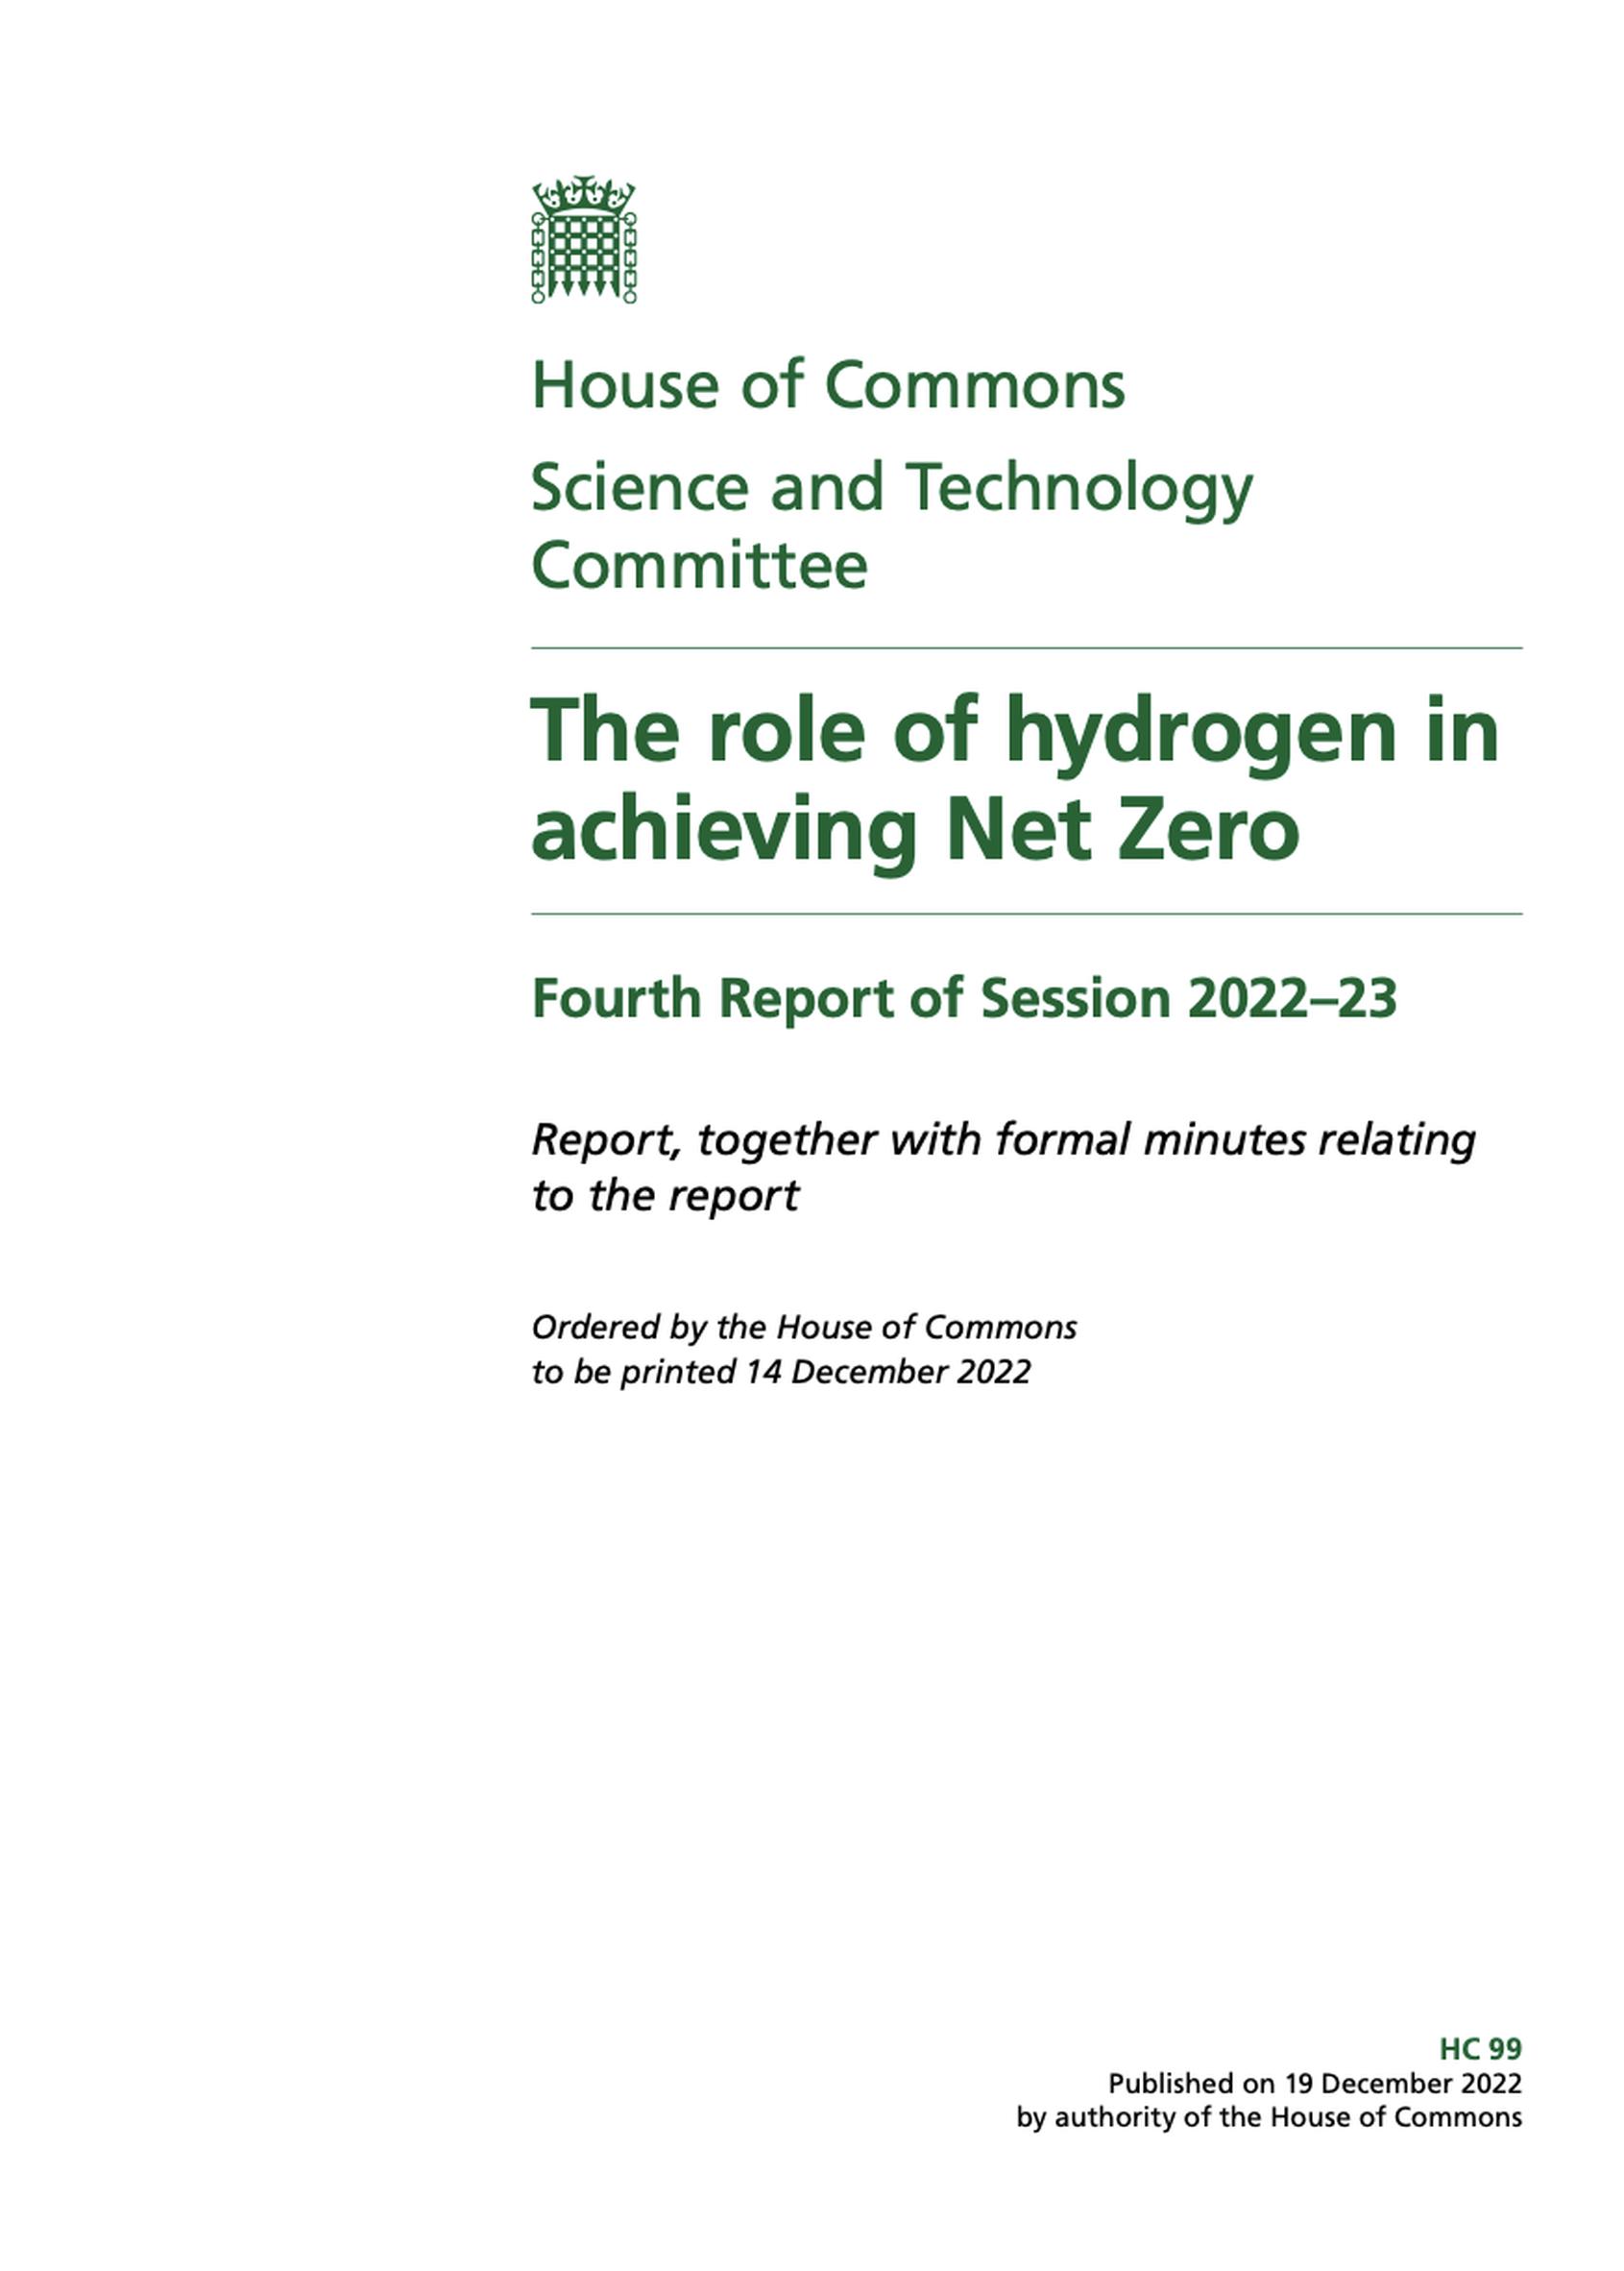 The role of hydrogen in achieving net zero